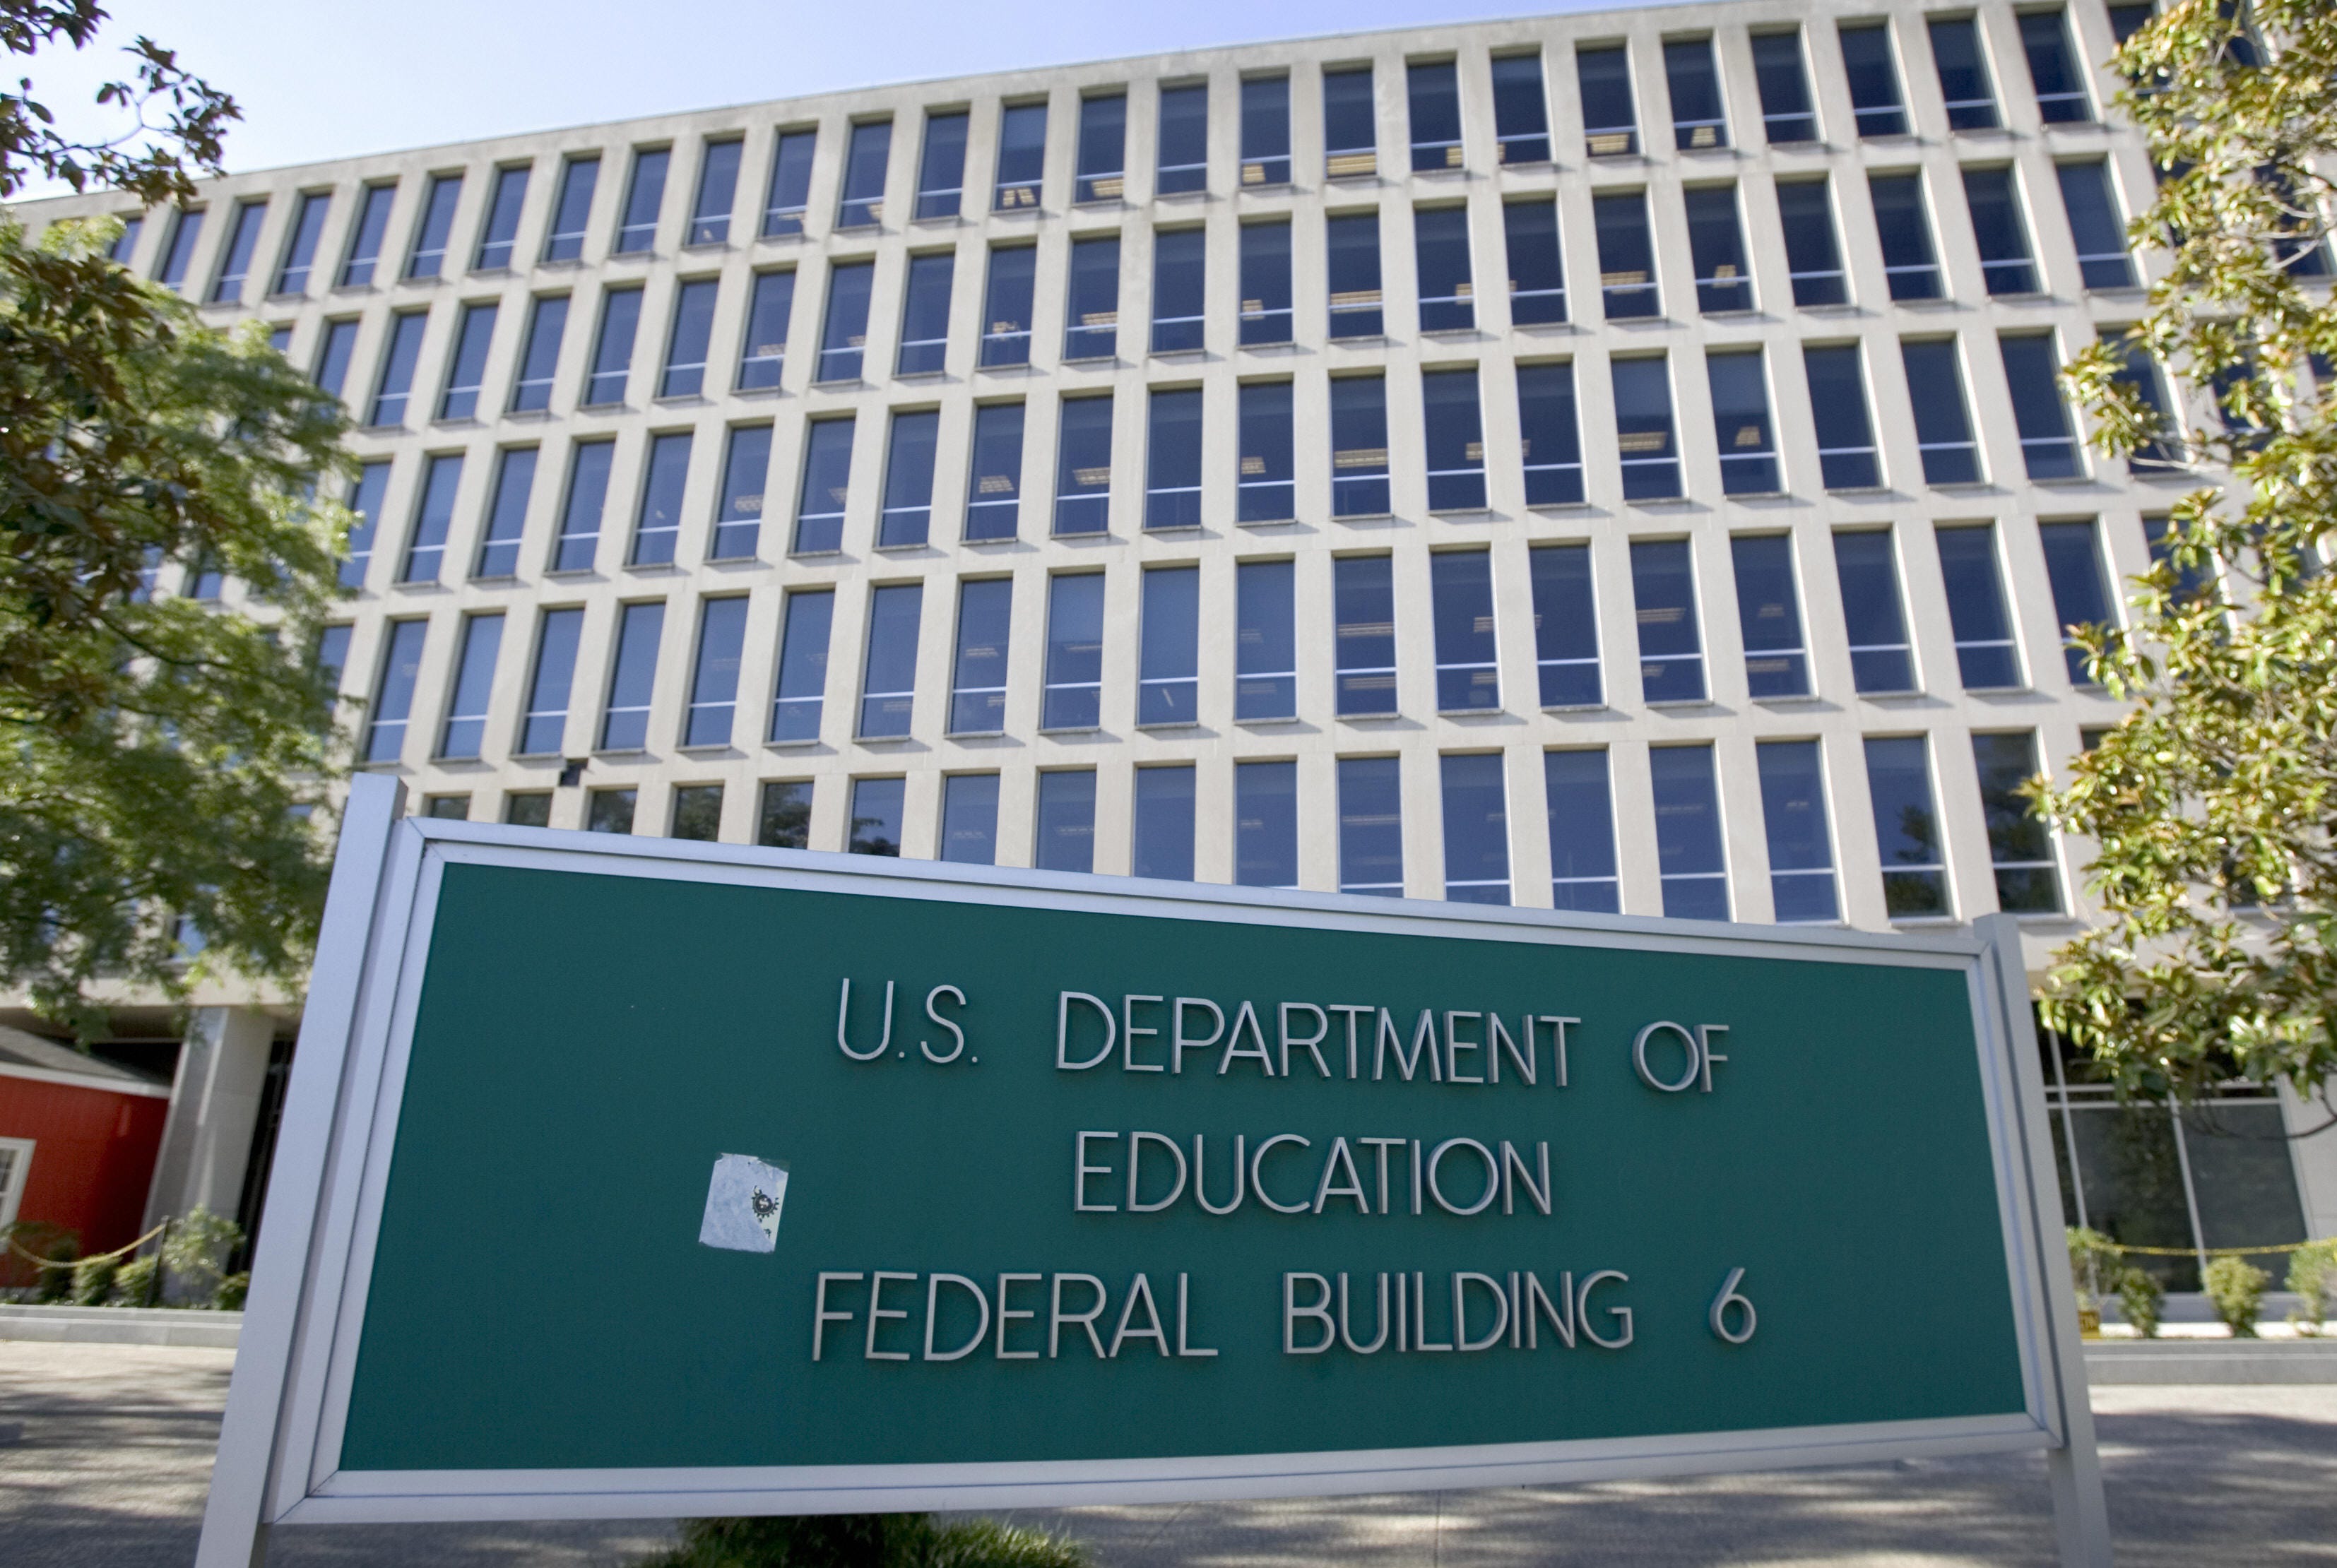 The US Department of Education building is shown in Washington, DC, July 21, 2007.